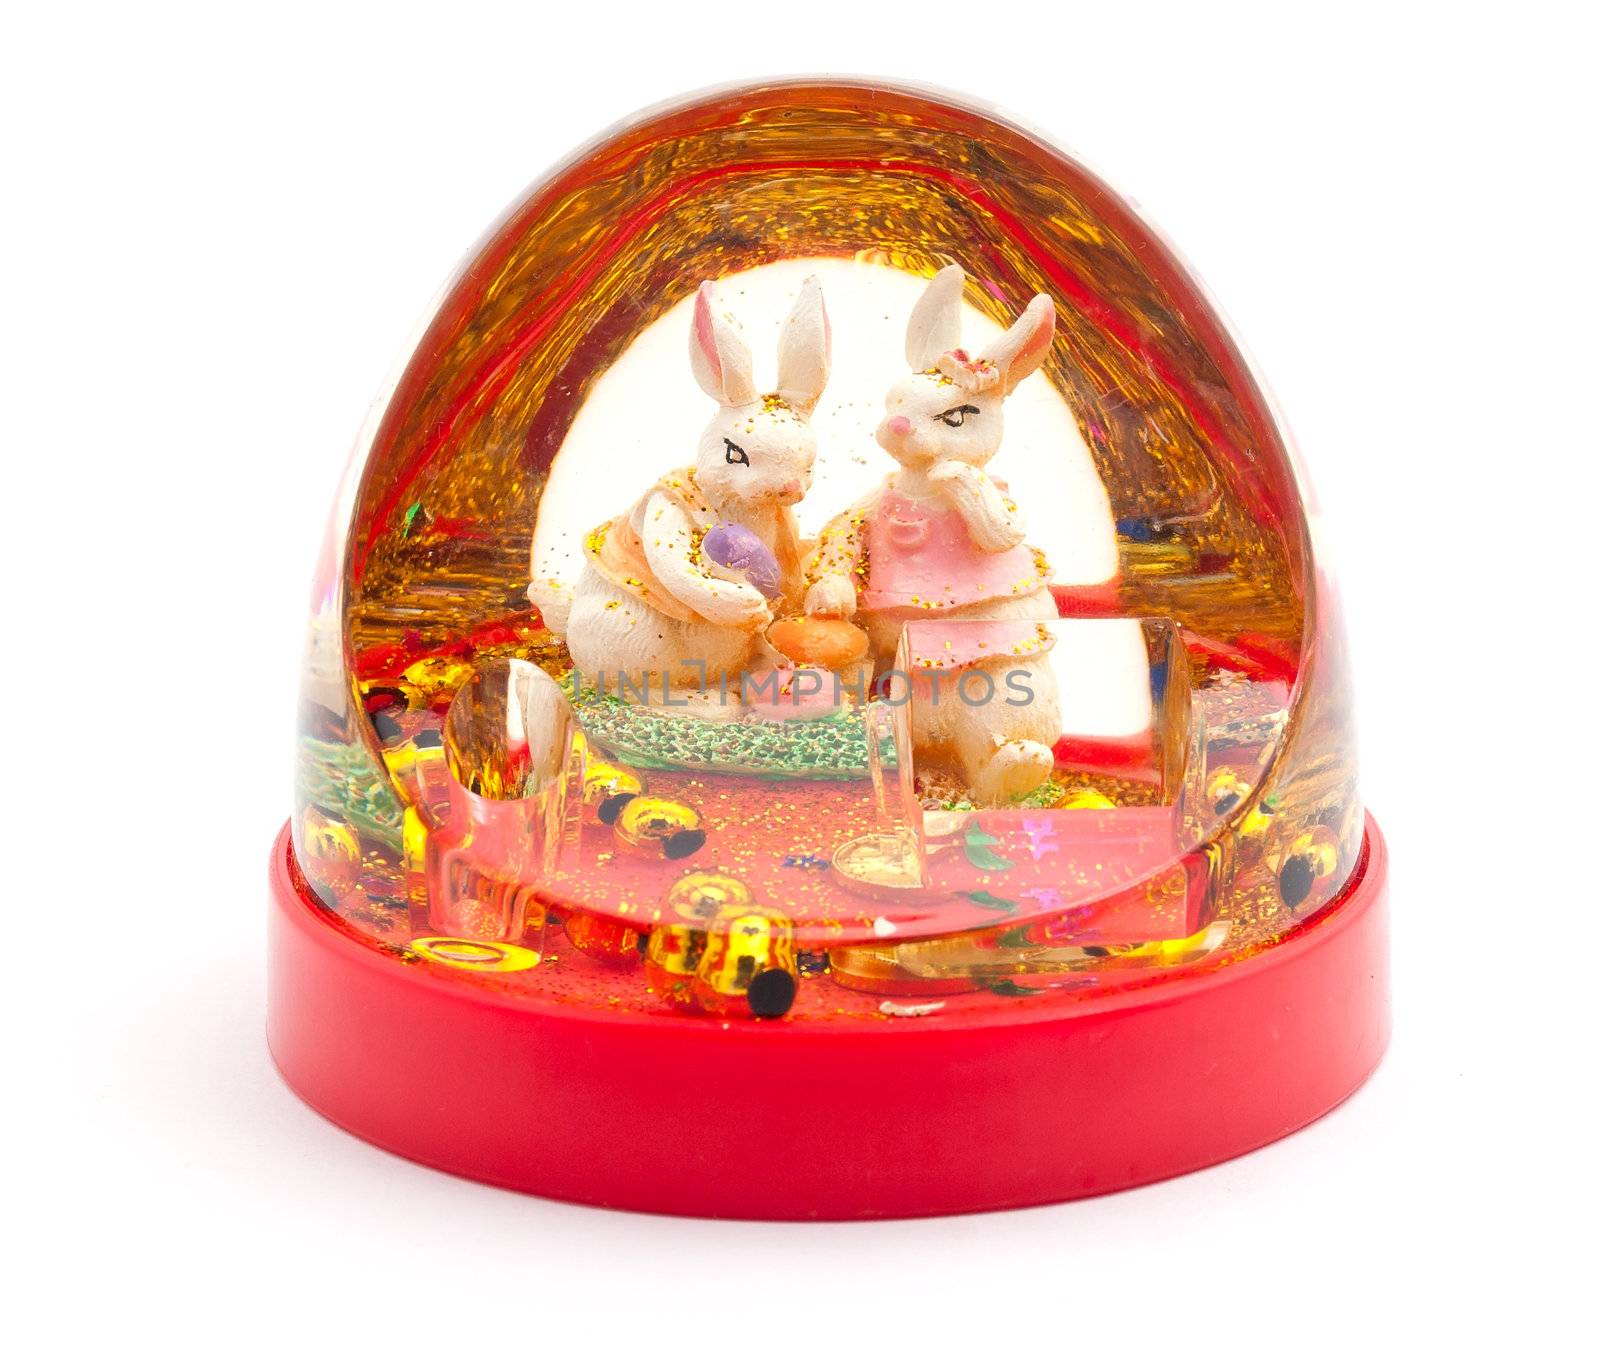 Christmas toy with two rabbits by Diversphoto